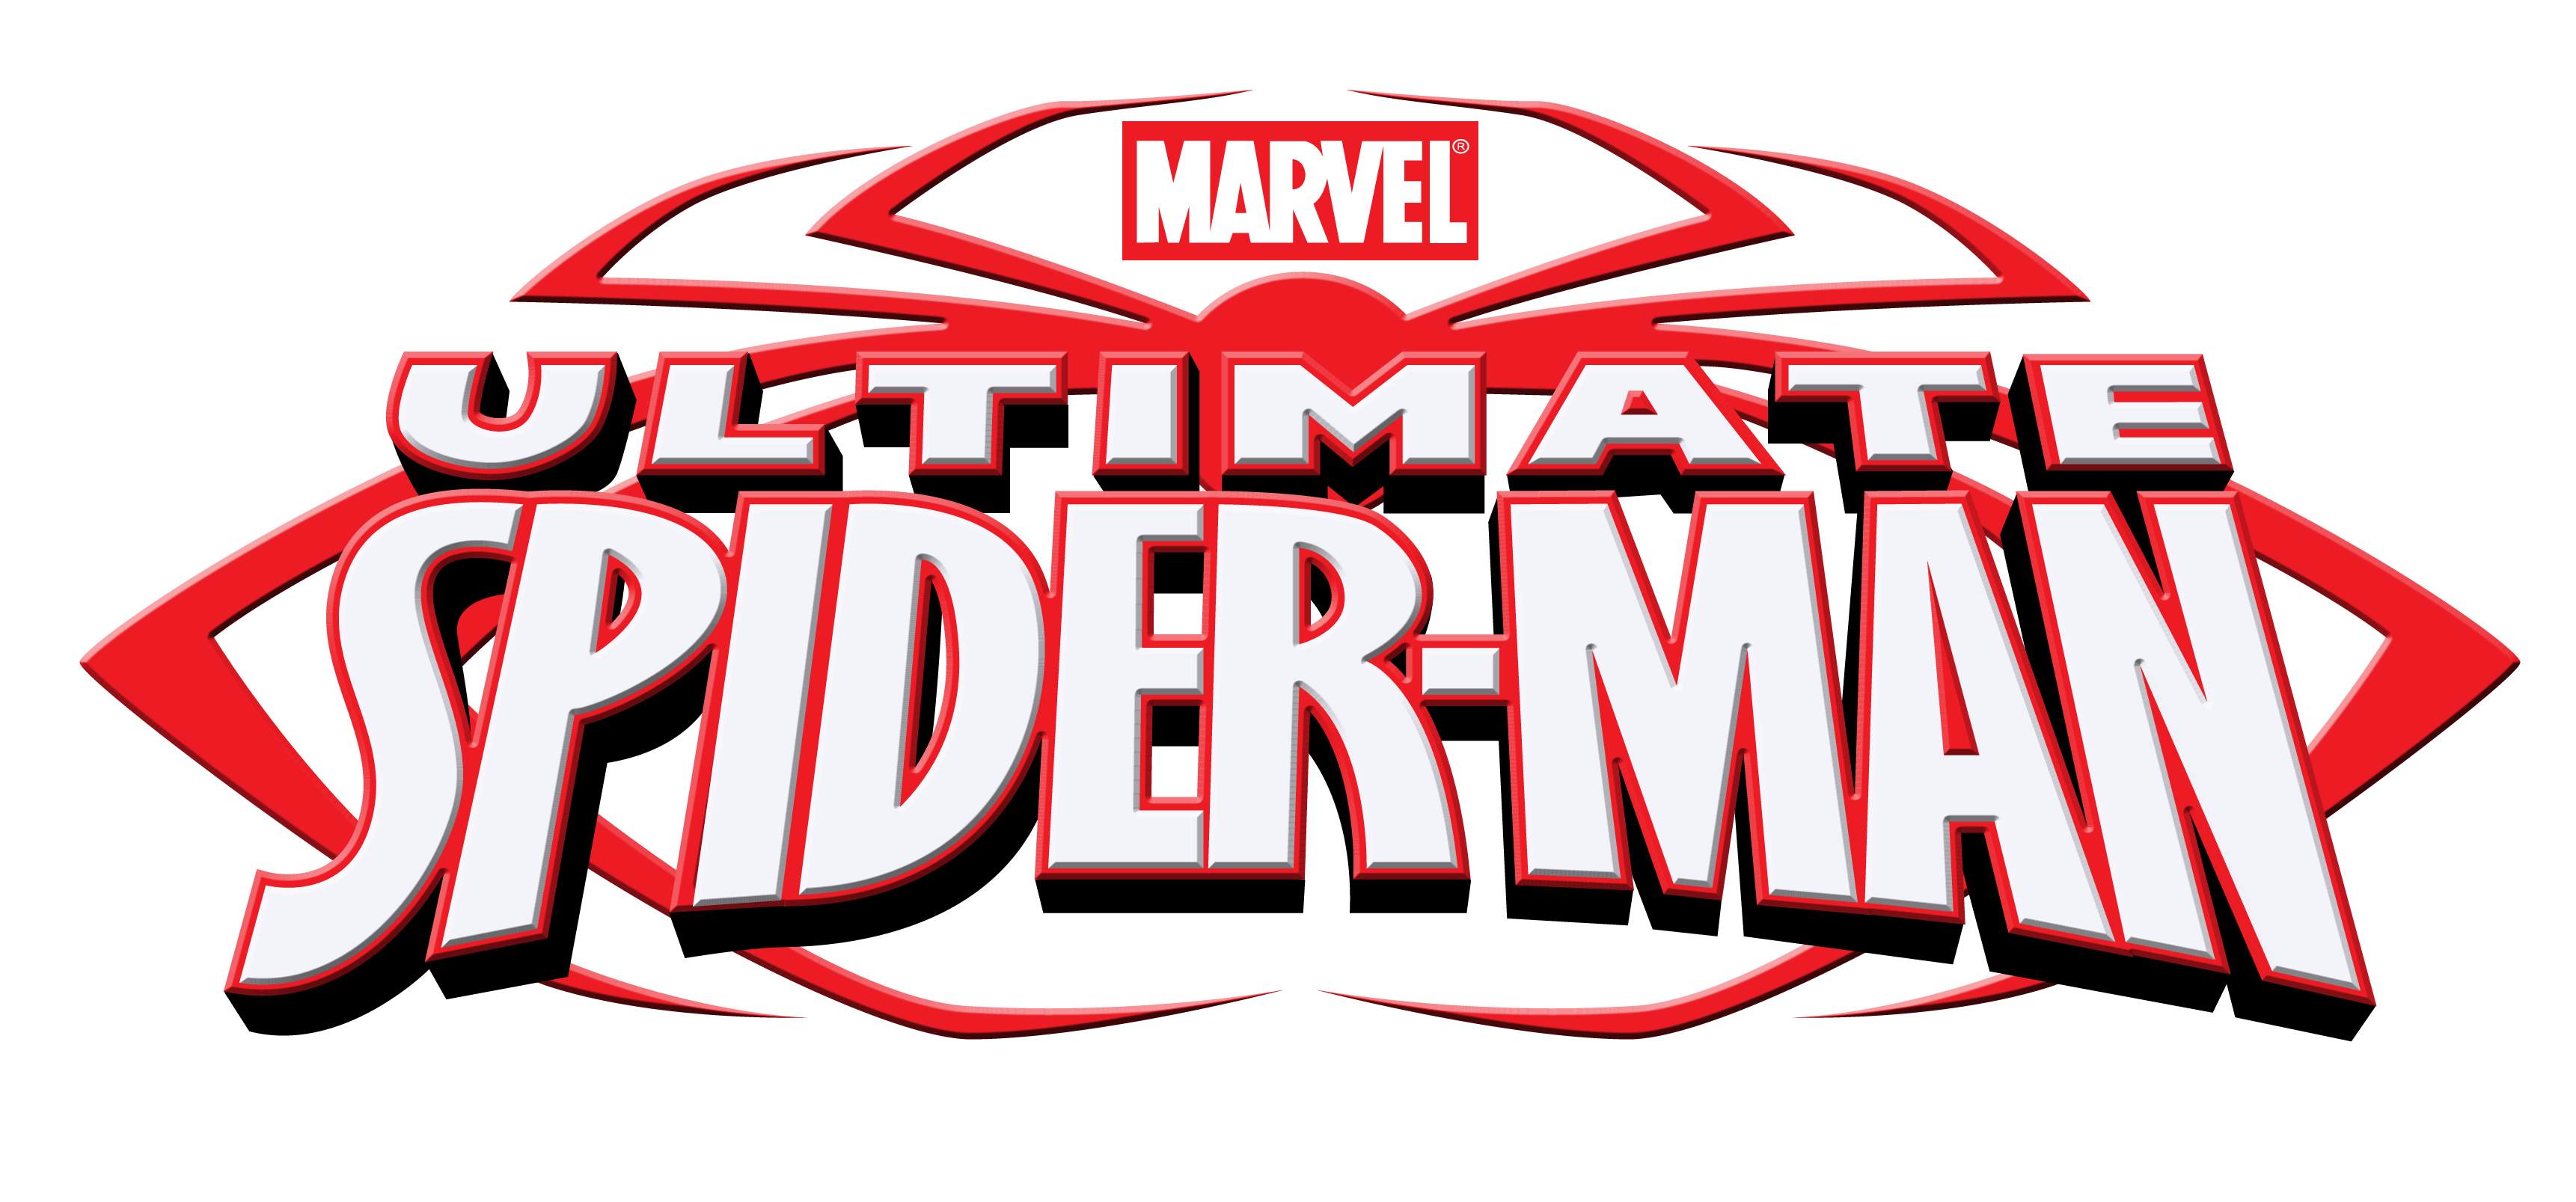 Image - Ultimate Spider-Man.png | Logopedia | Fandom powered by Wikia